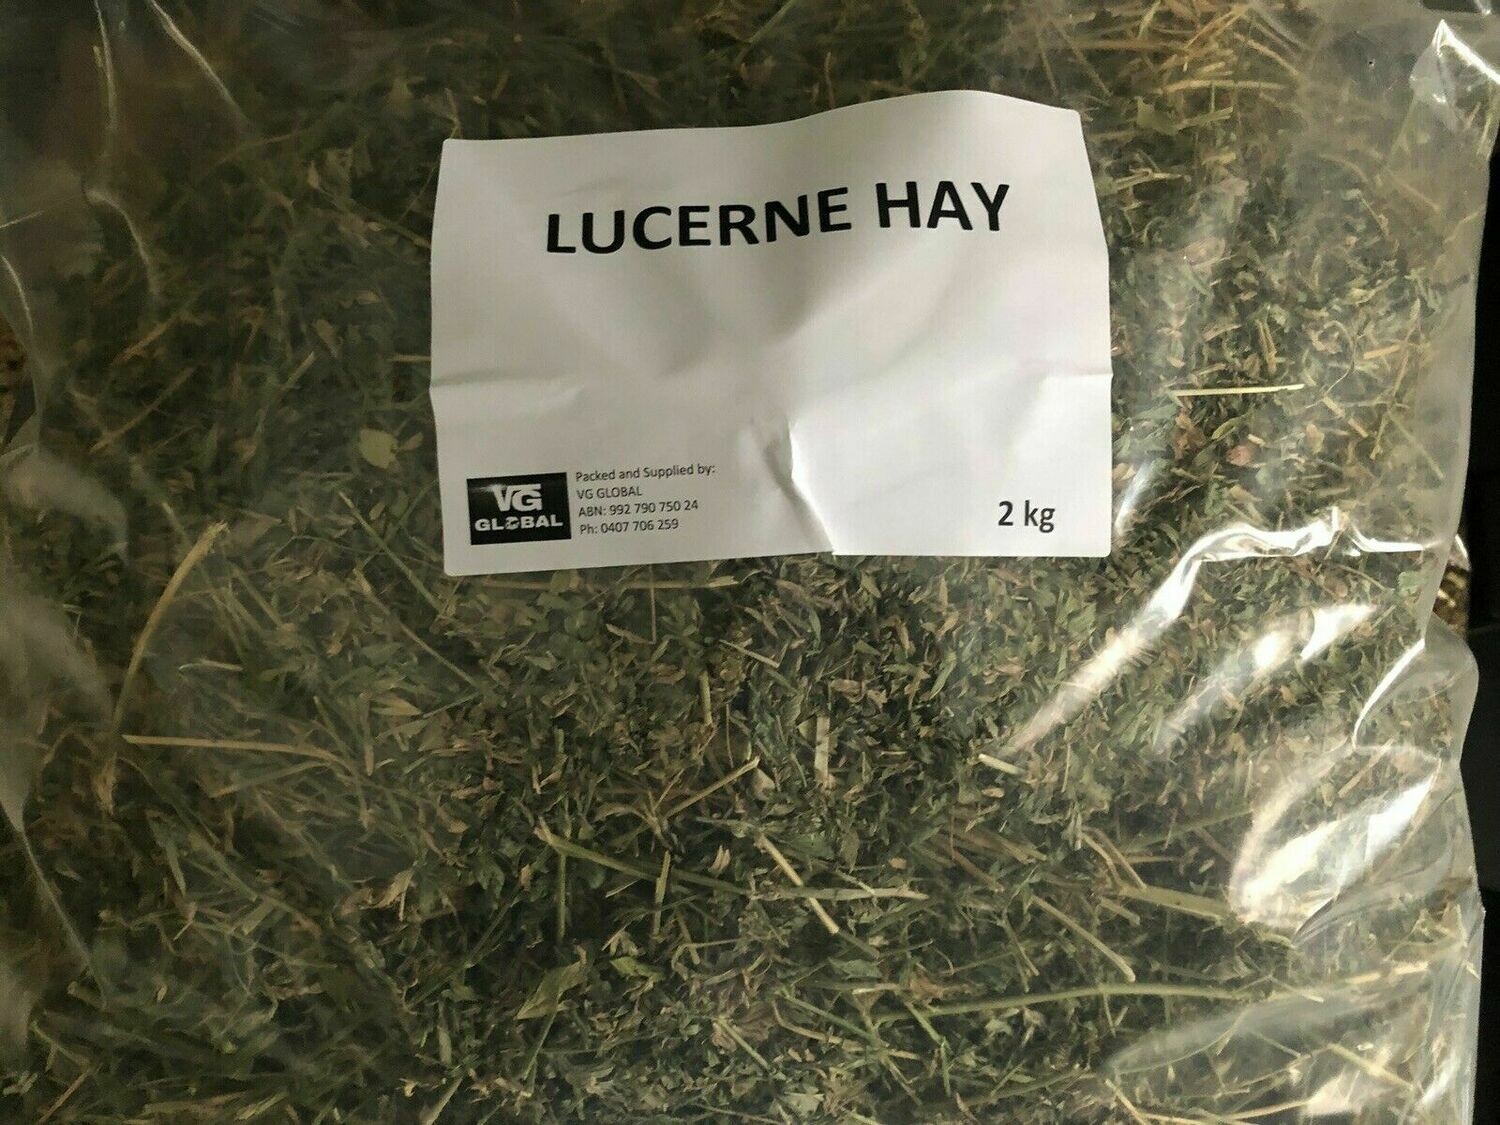 Prime Lucerne Hay horse quality 2kg Baby Rabbit and Guinea pig under 6 months